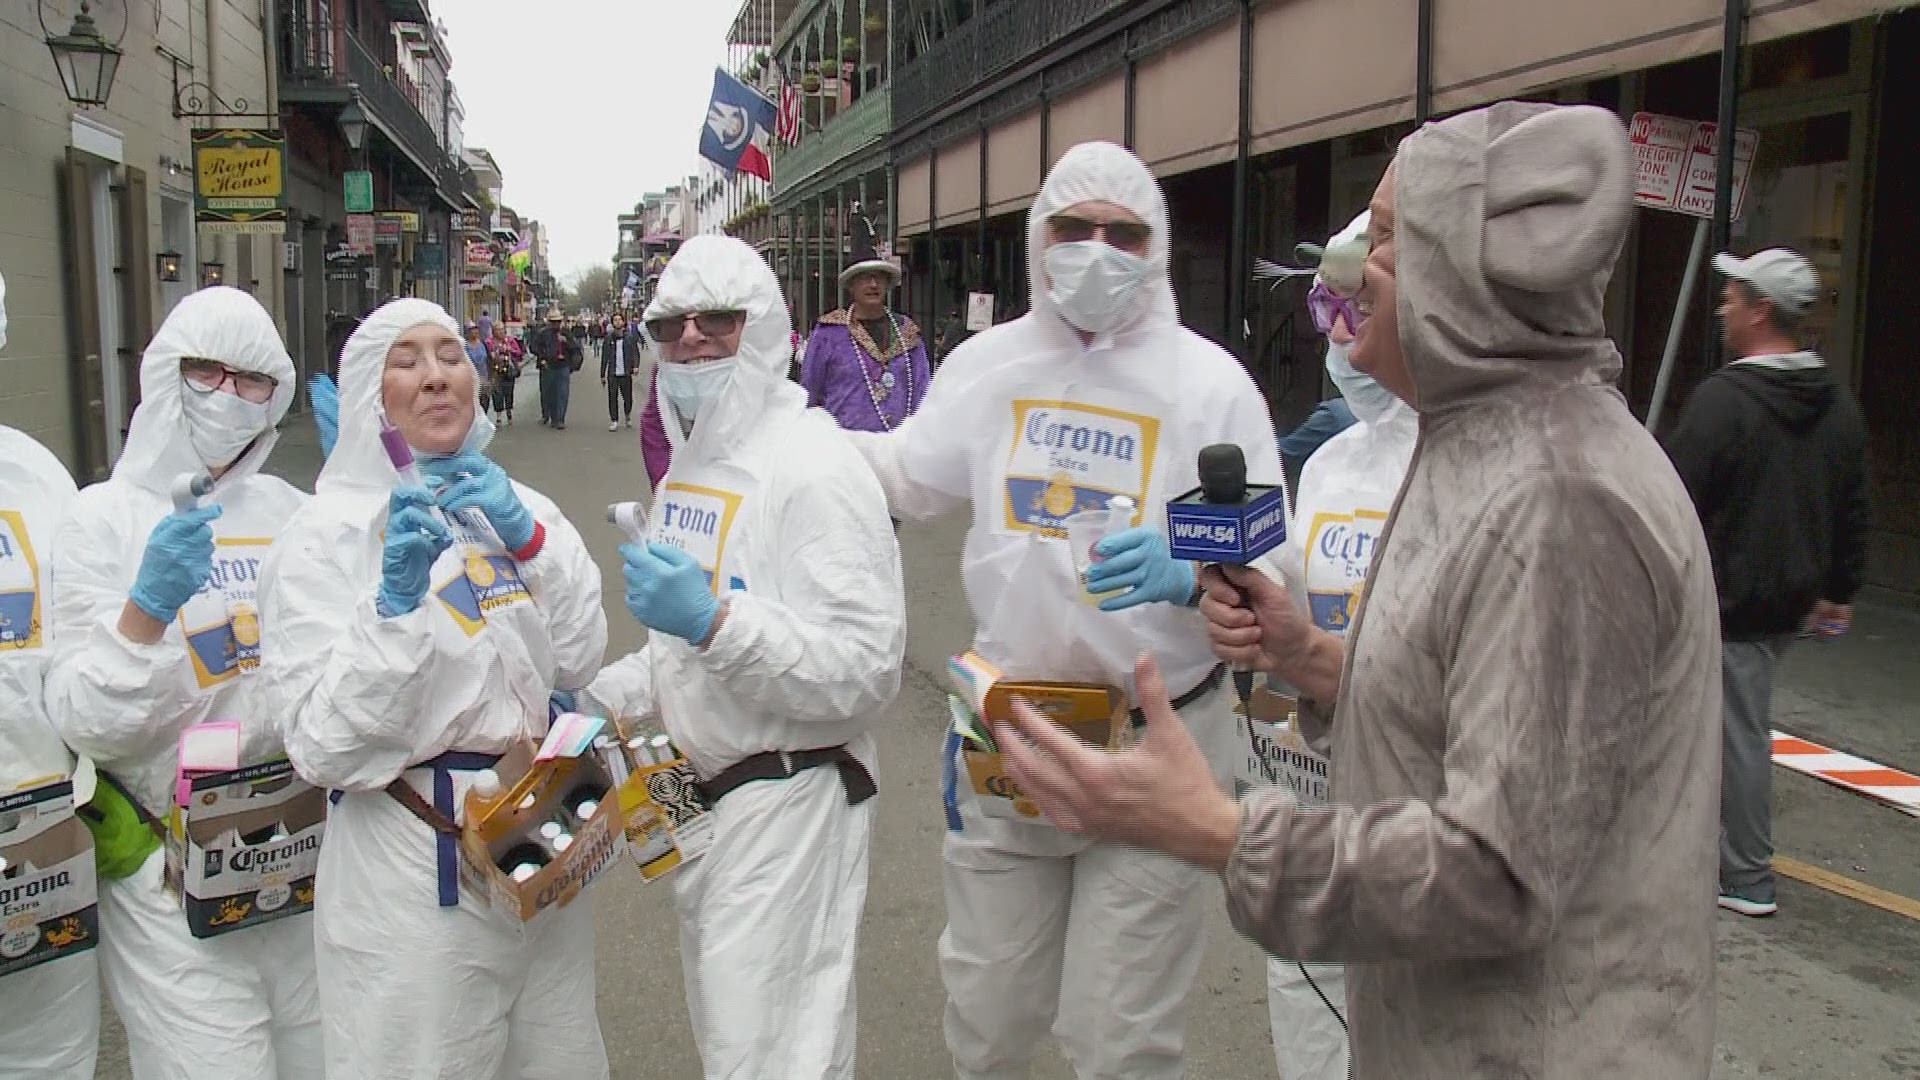 The Bourbon Street Rats investigate some of the most biting satirical costumes in the French Quarter.